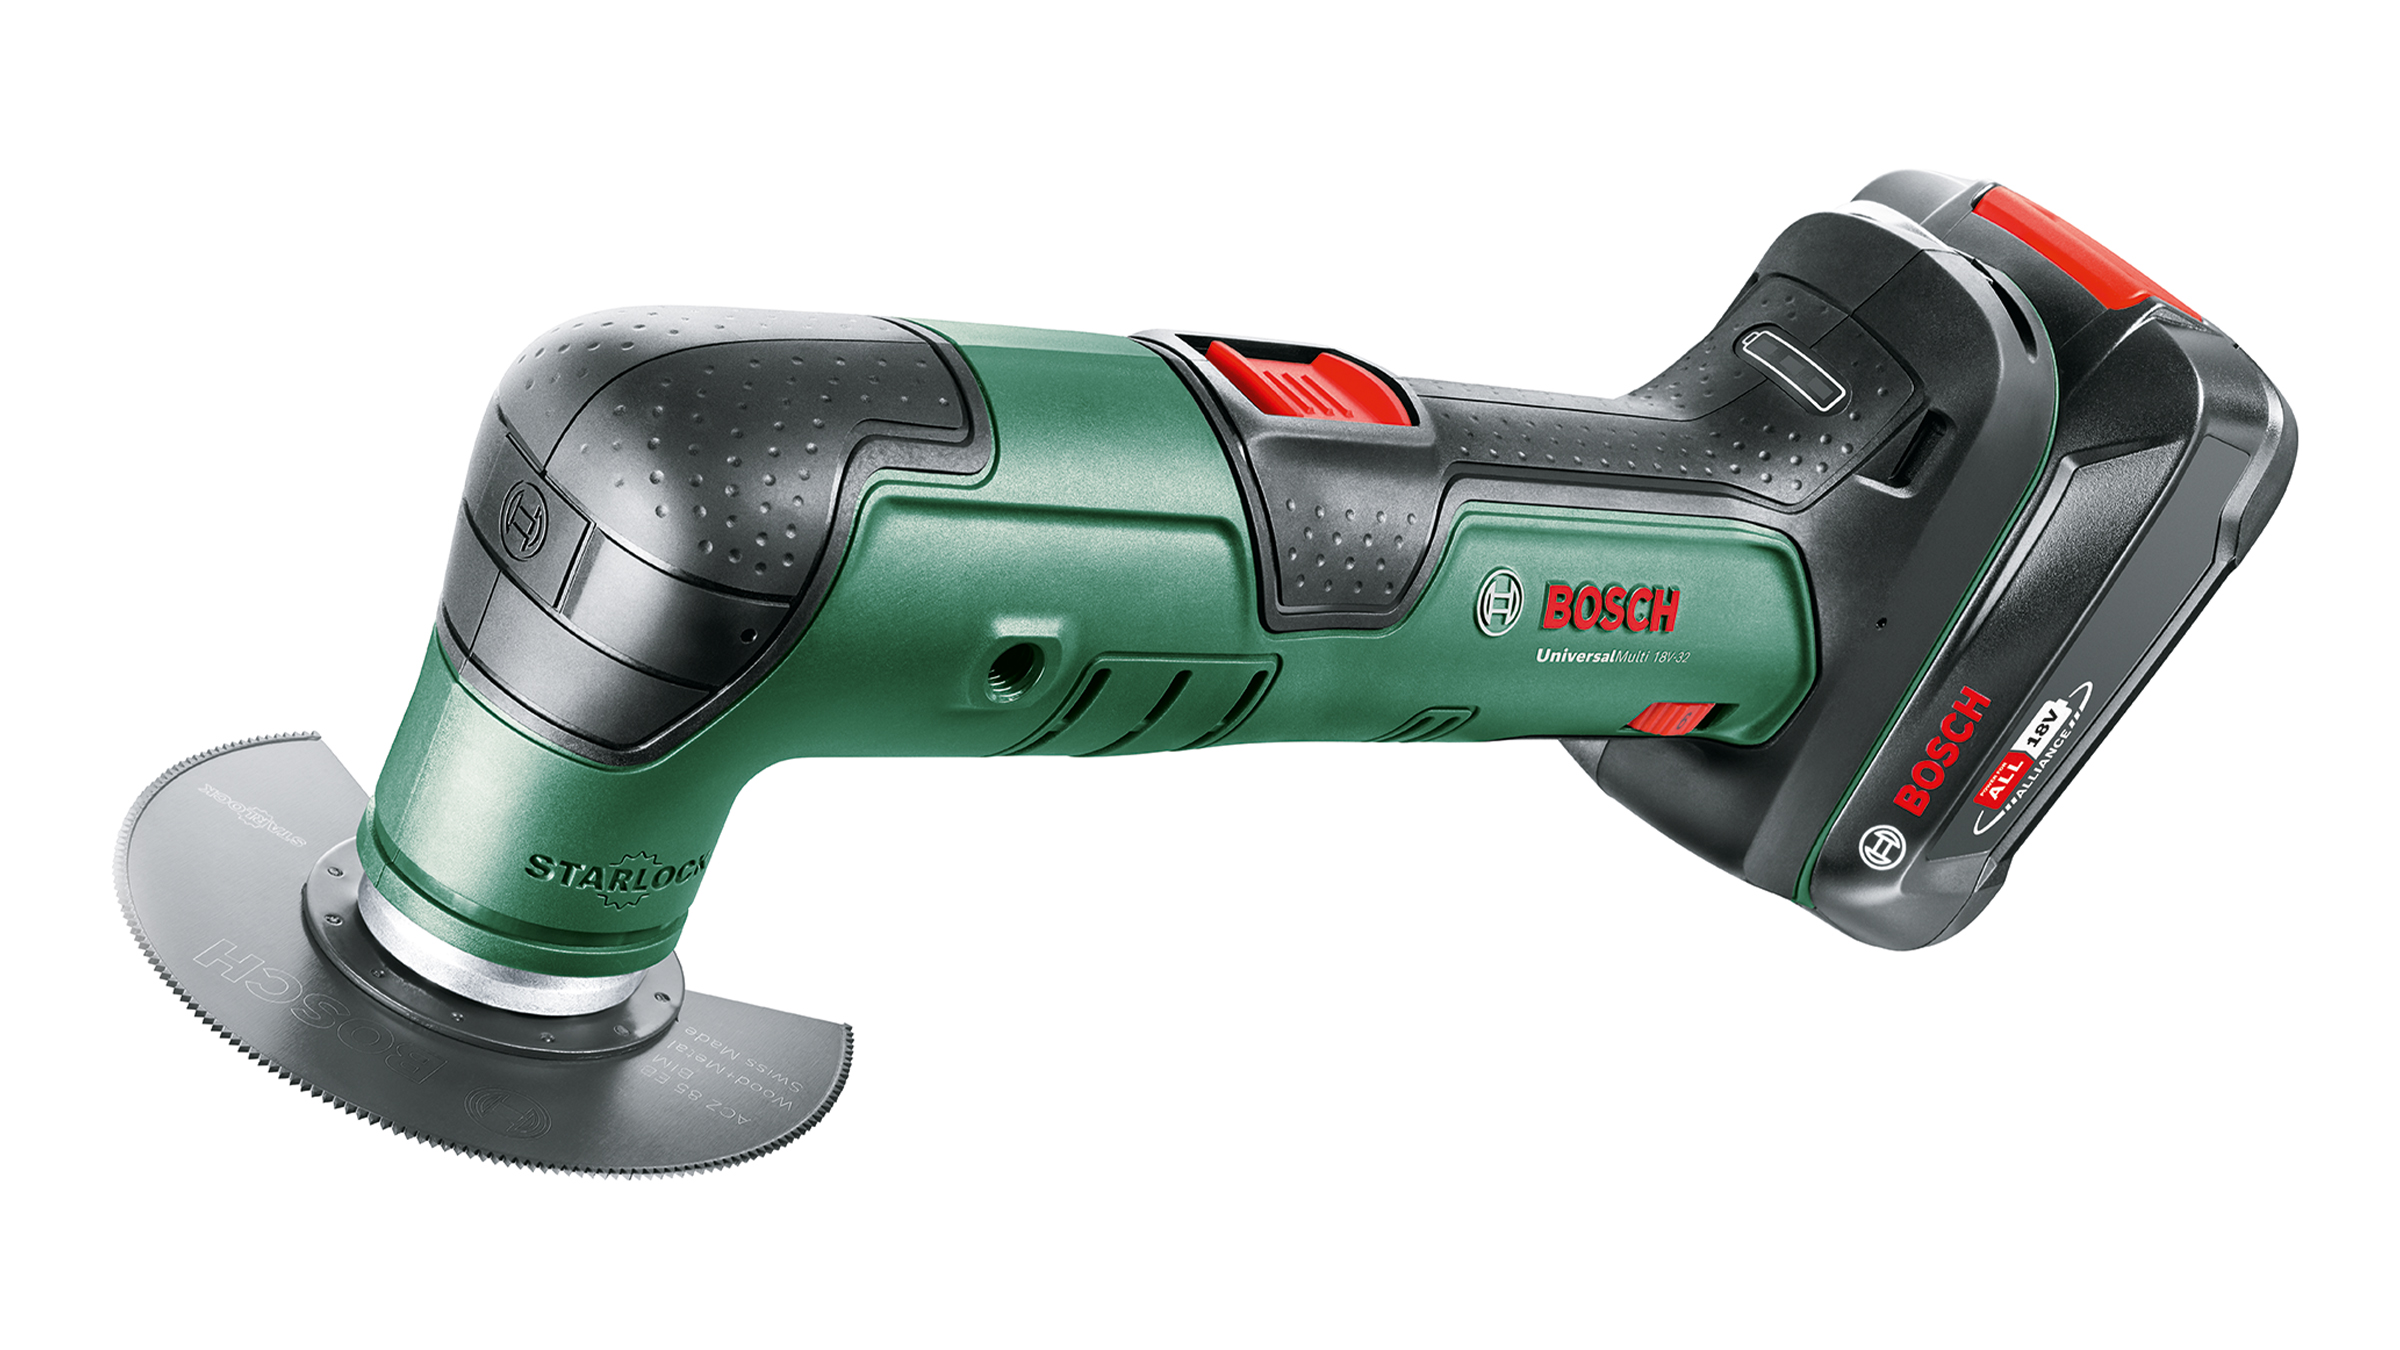 Versatile, compact, and easy-to-use: UniversalMulti 18V-32 cordless multifunction tool from Bosch for DIYers